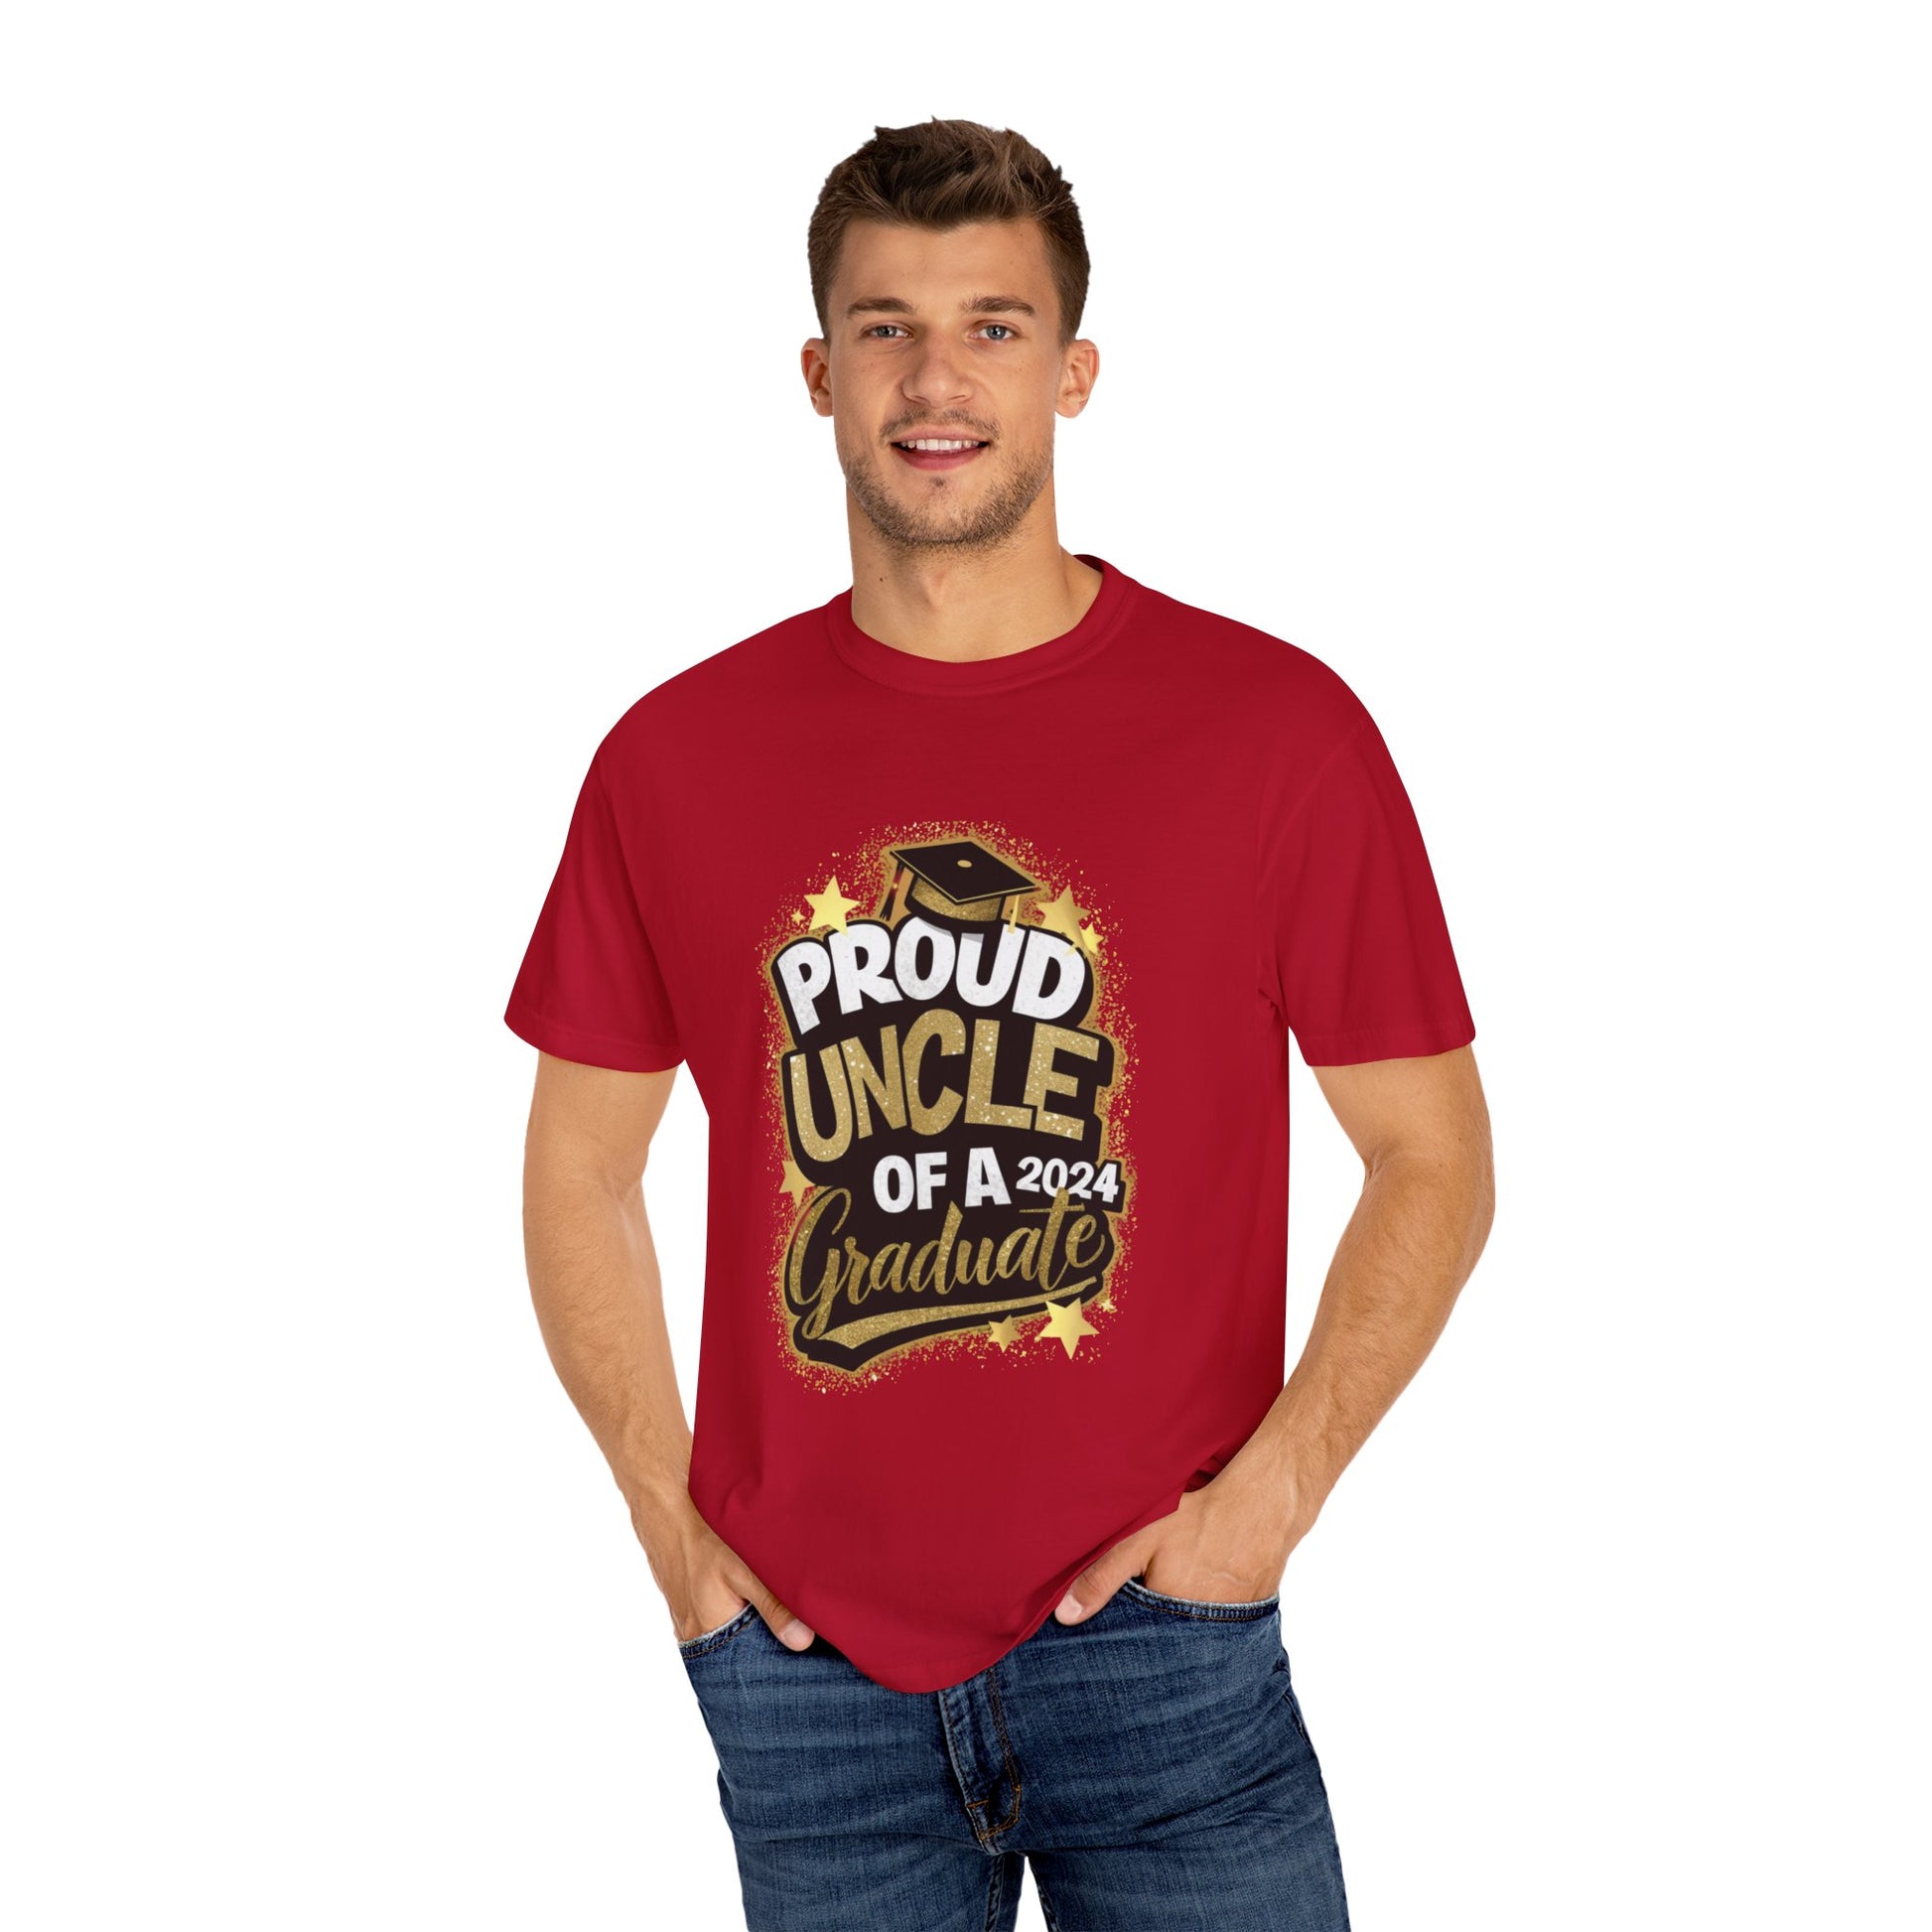 Proud Uncle of a 2024 Graduate Unisex Garment-dyed T-shirt Cotton Funny Humorous Graphic Soft Premium Unisex Men Women Red T-shirt Birthday Gift-21